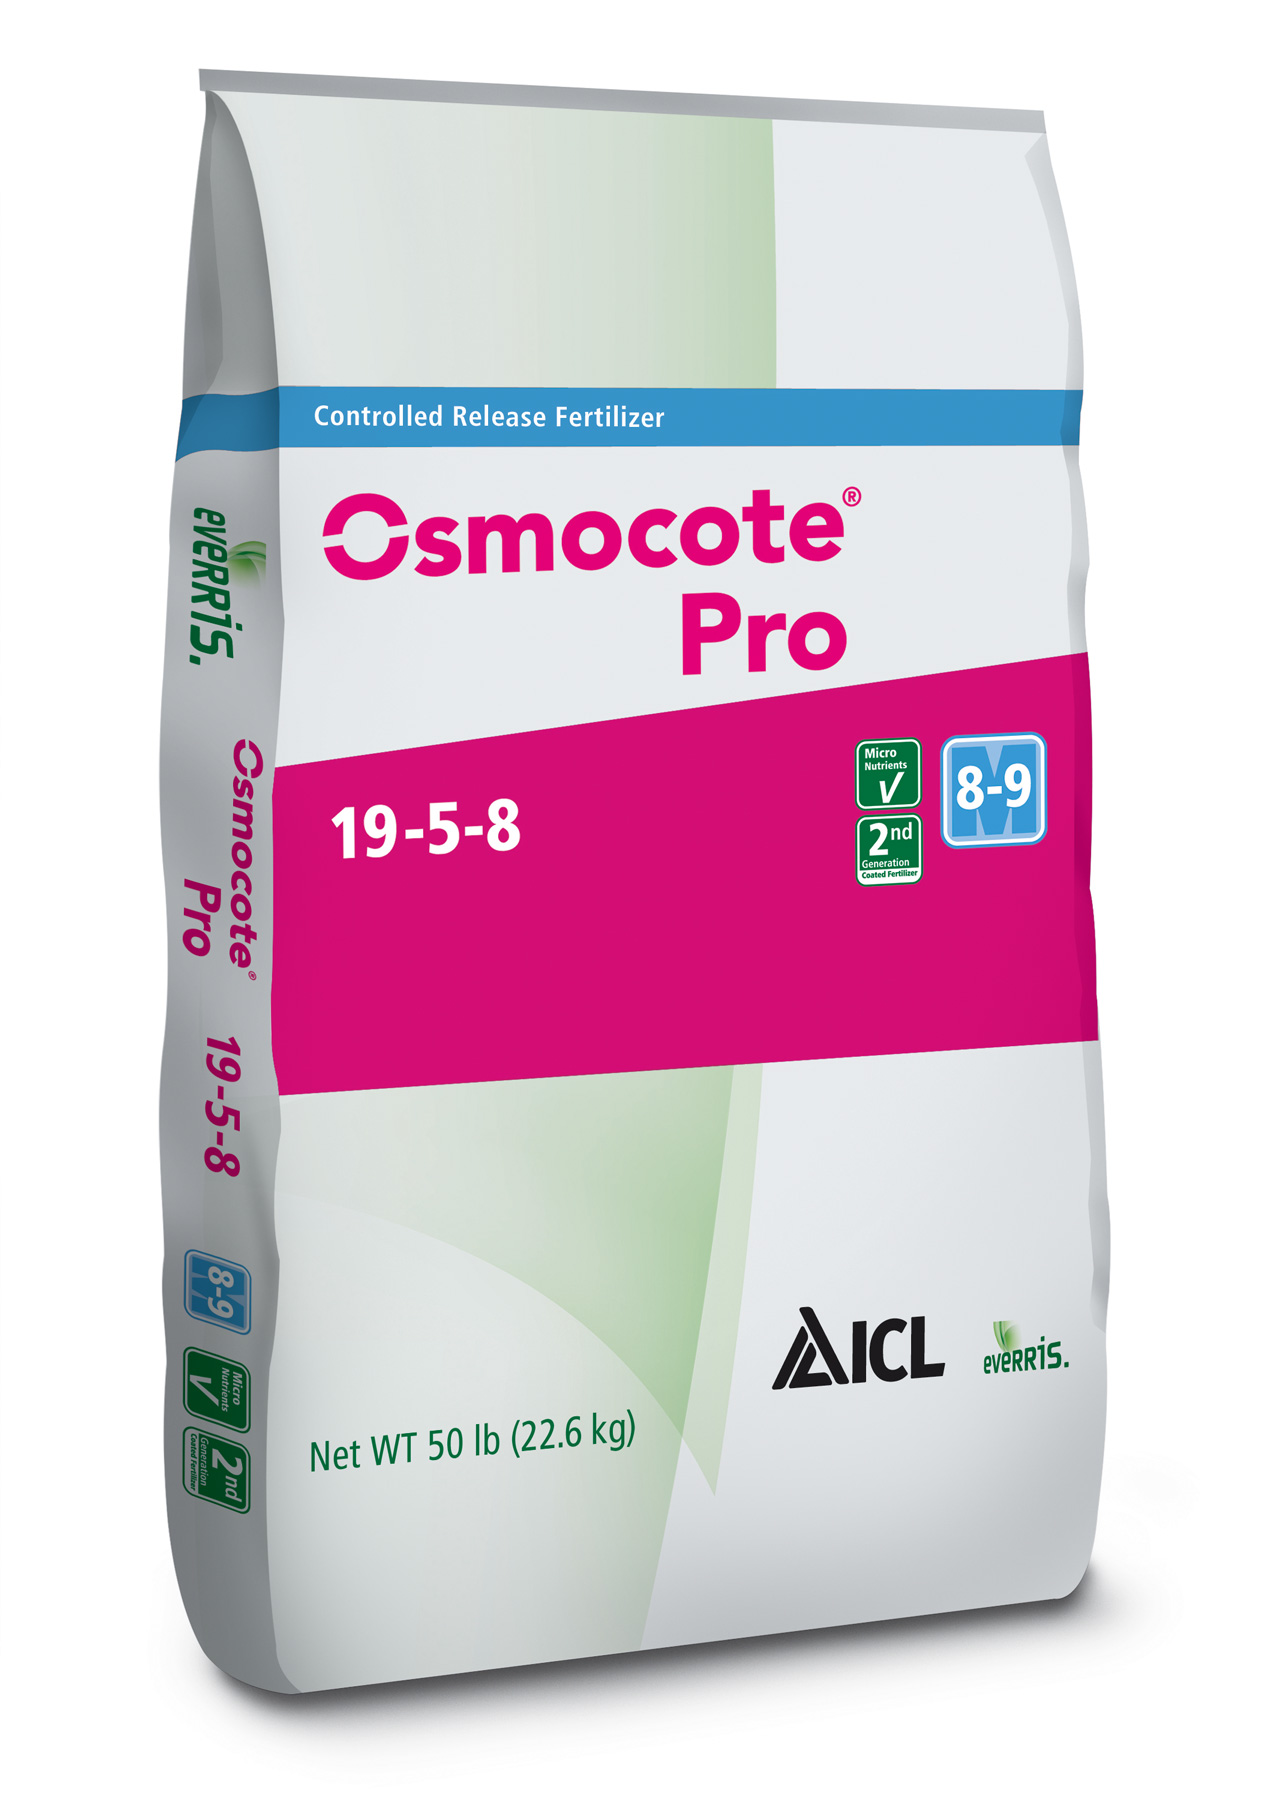 Osmocote® Pro 19-5-8 8-9M 50 lb Bag - Controlled Release CRF